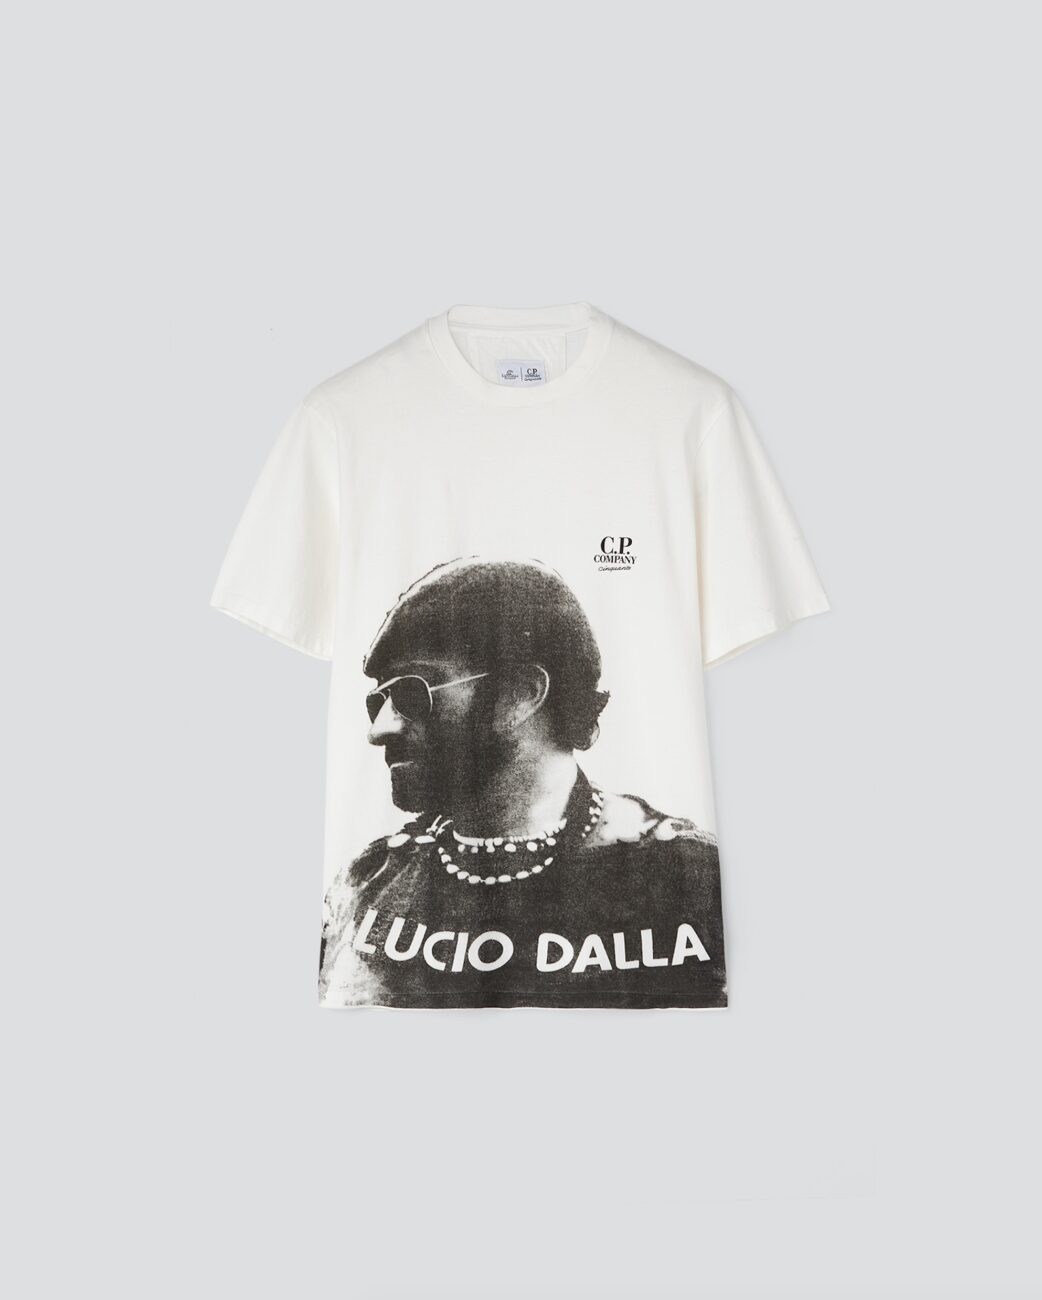 T-SHIRT 1 The first chapter of the C.P. COMPANY CINQUANTA series has been dedicated to the unique relationship between Massimo Osti and Lucio Dalla